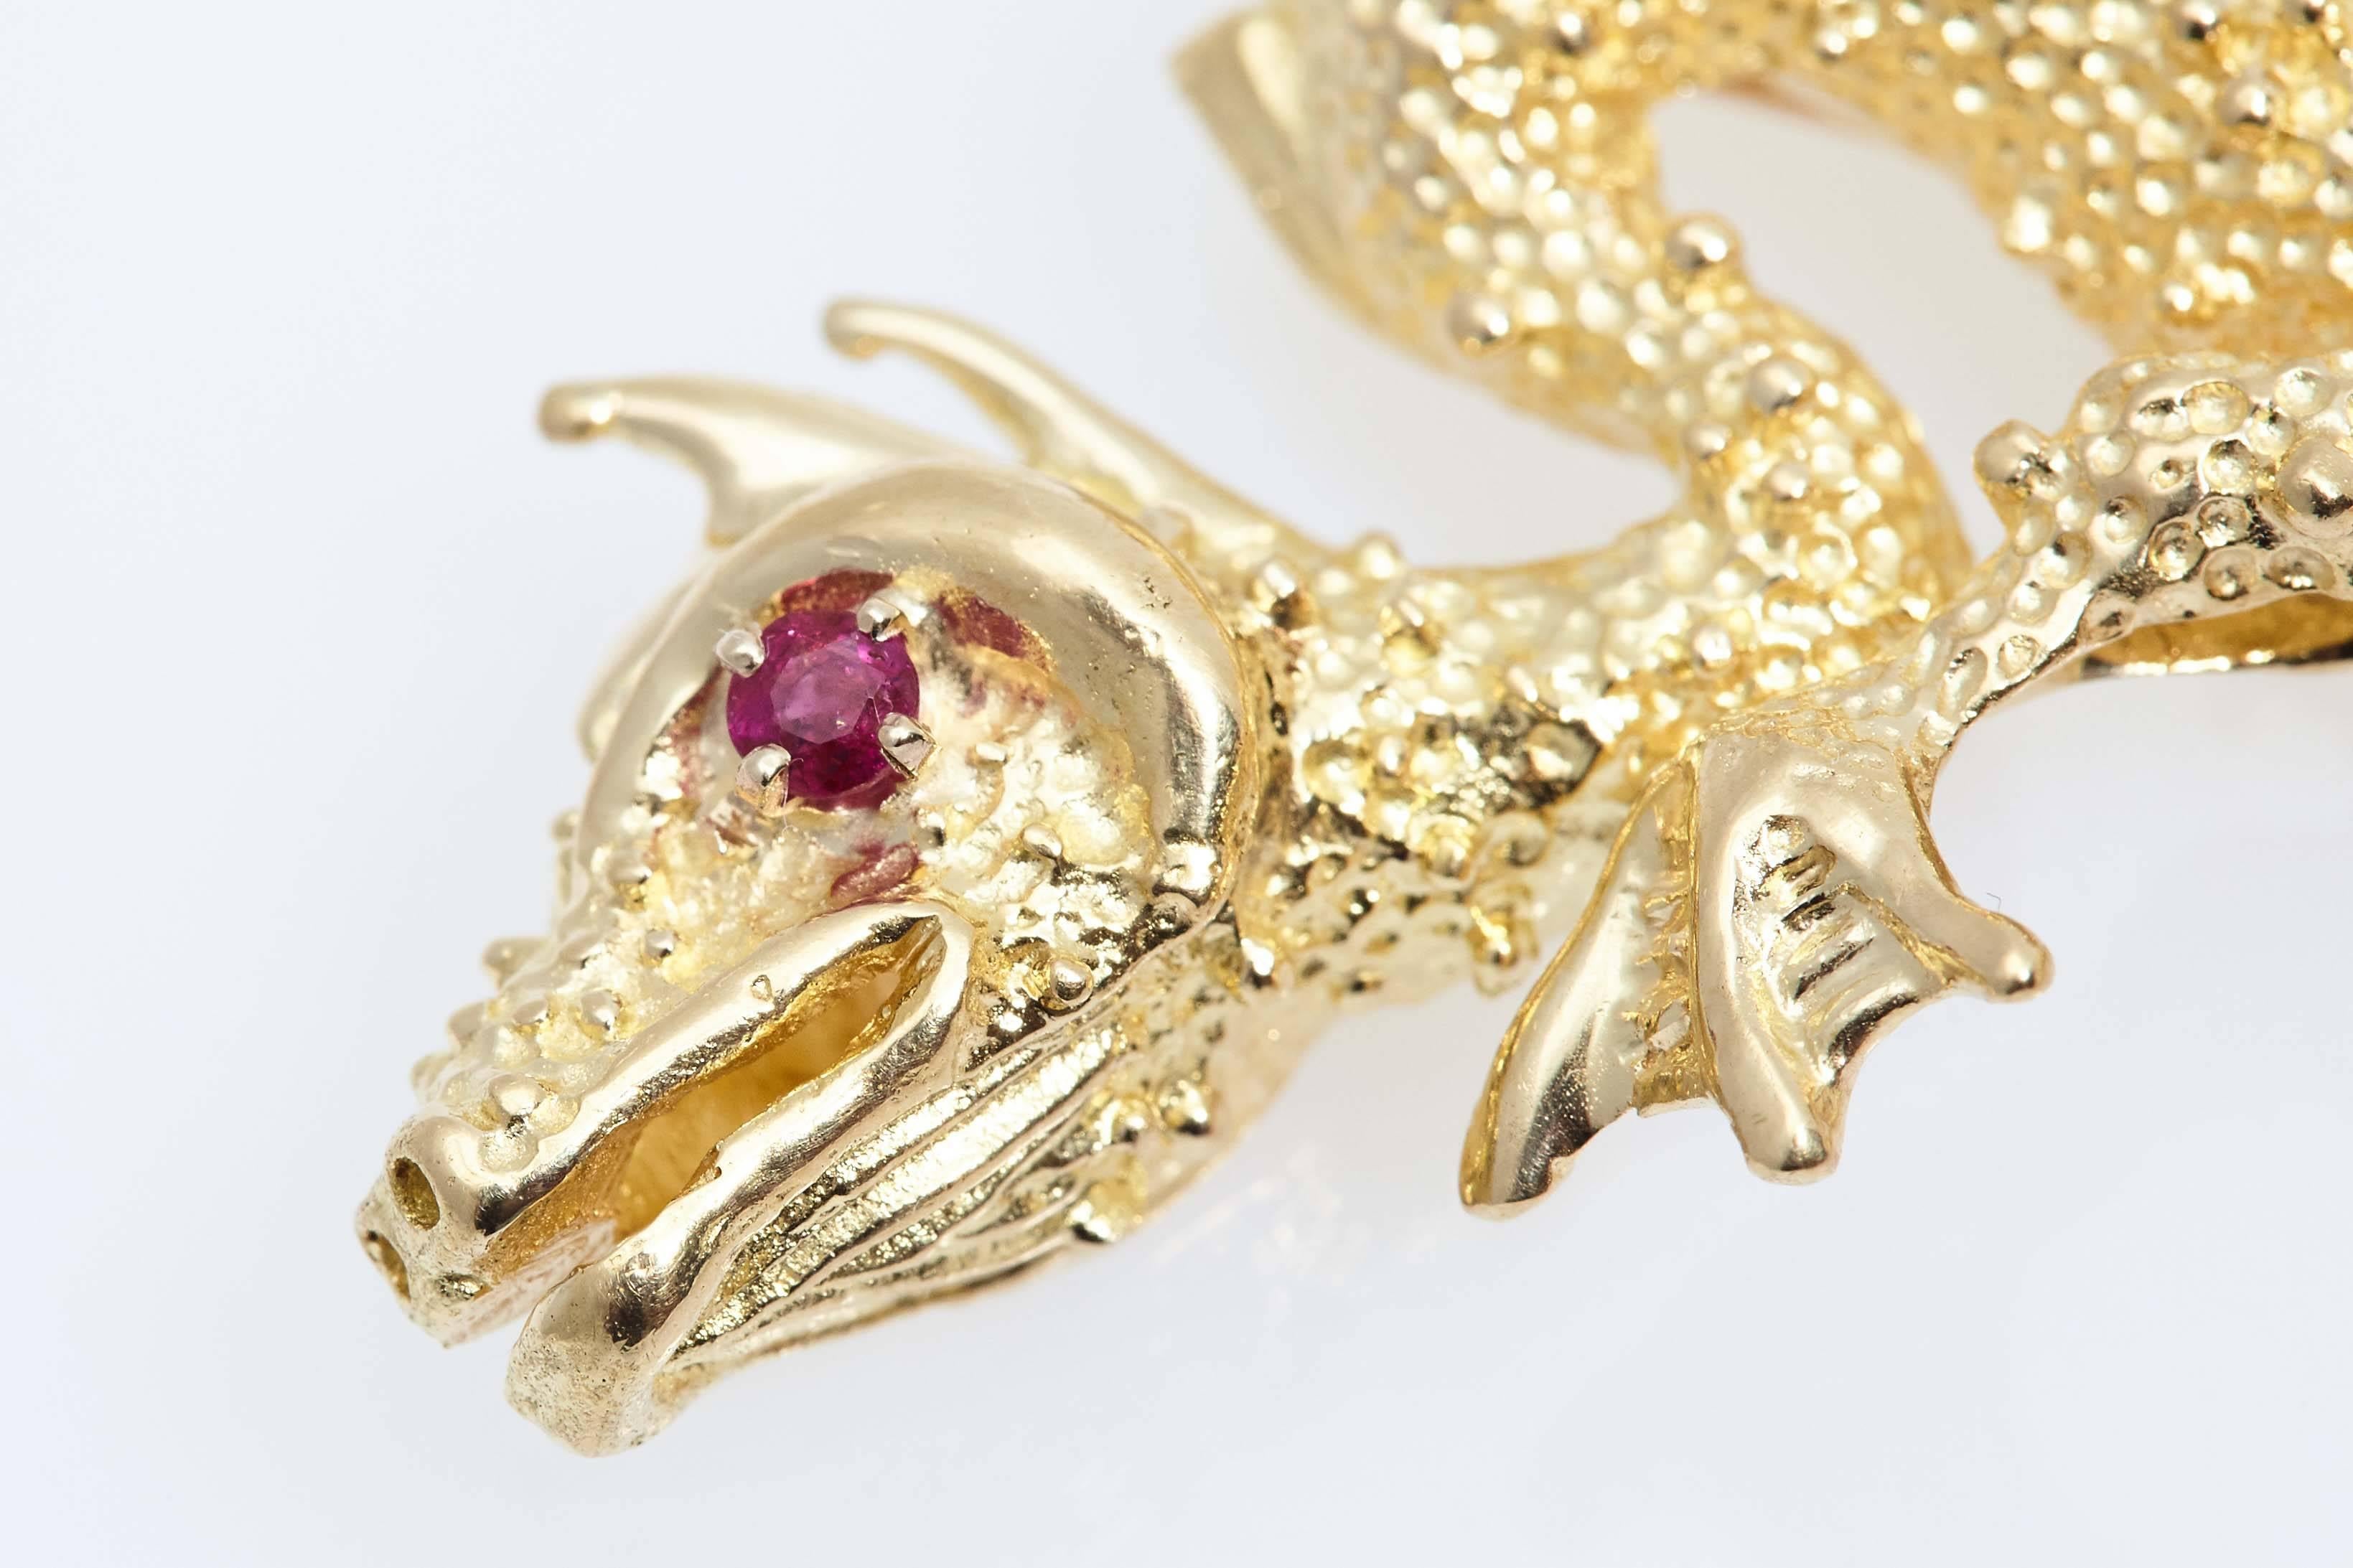 Van Cleef & Arpels eighteen karat yellow gold dragon brooch containing a round ruby eye.  The ruby weighs approximately .12 carat.the brooch measures 3 1/8 inches long and approximately 1 3/4 inches from top to bottom. It is marked "VCA and